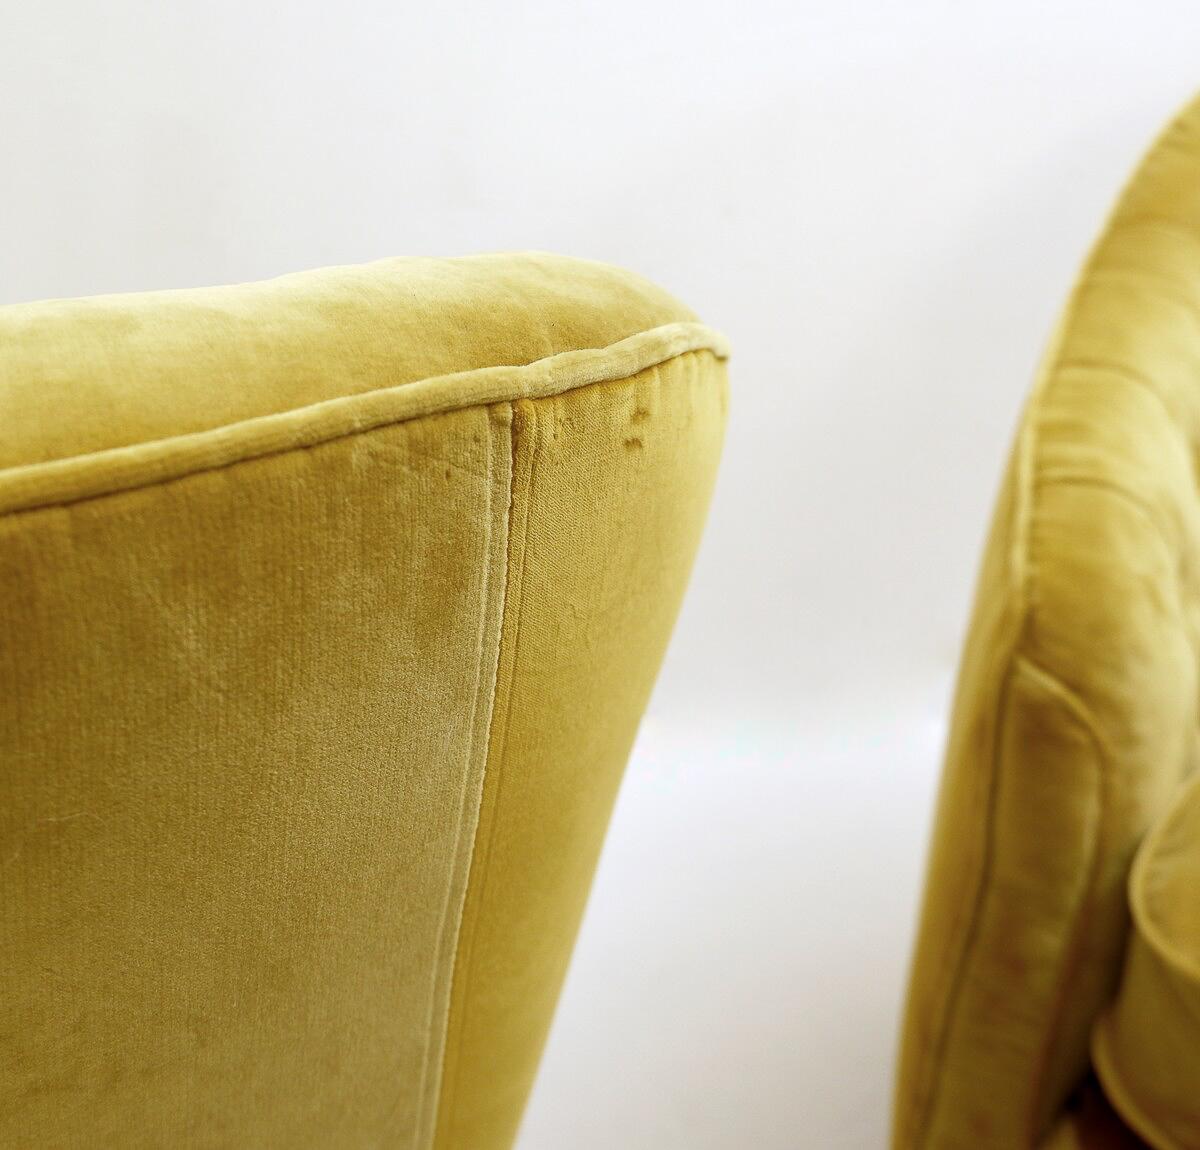  Pair of Velvet Armchairs in the style of Gio Ponti, Italy, 1950s For Sale 5